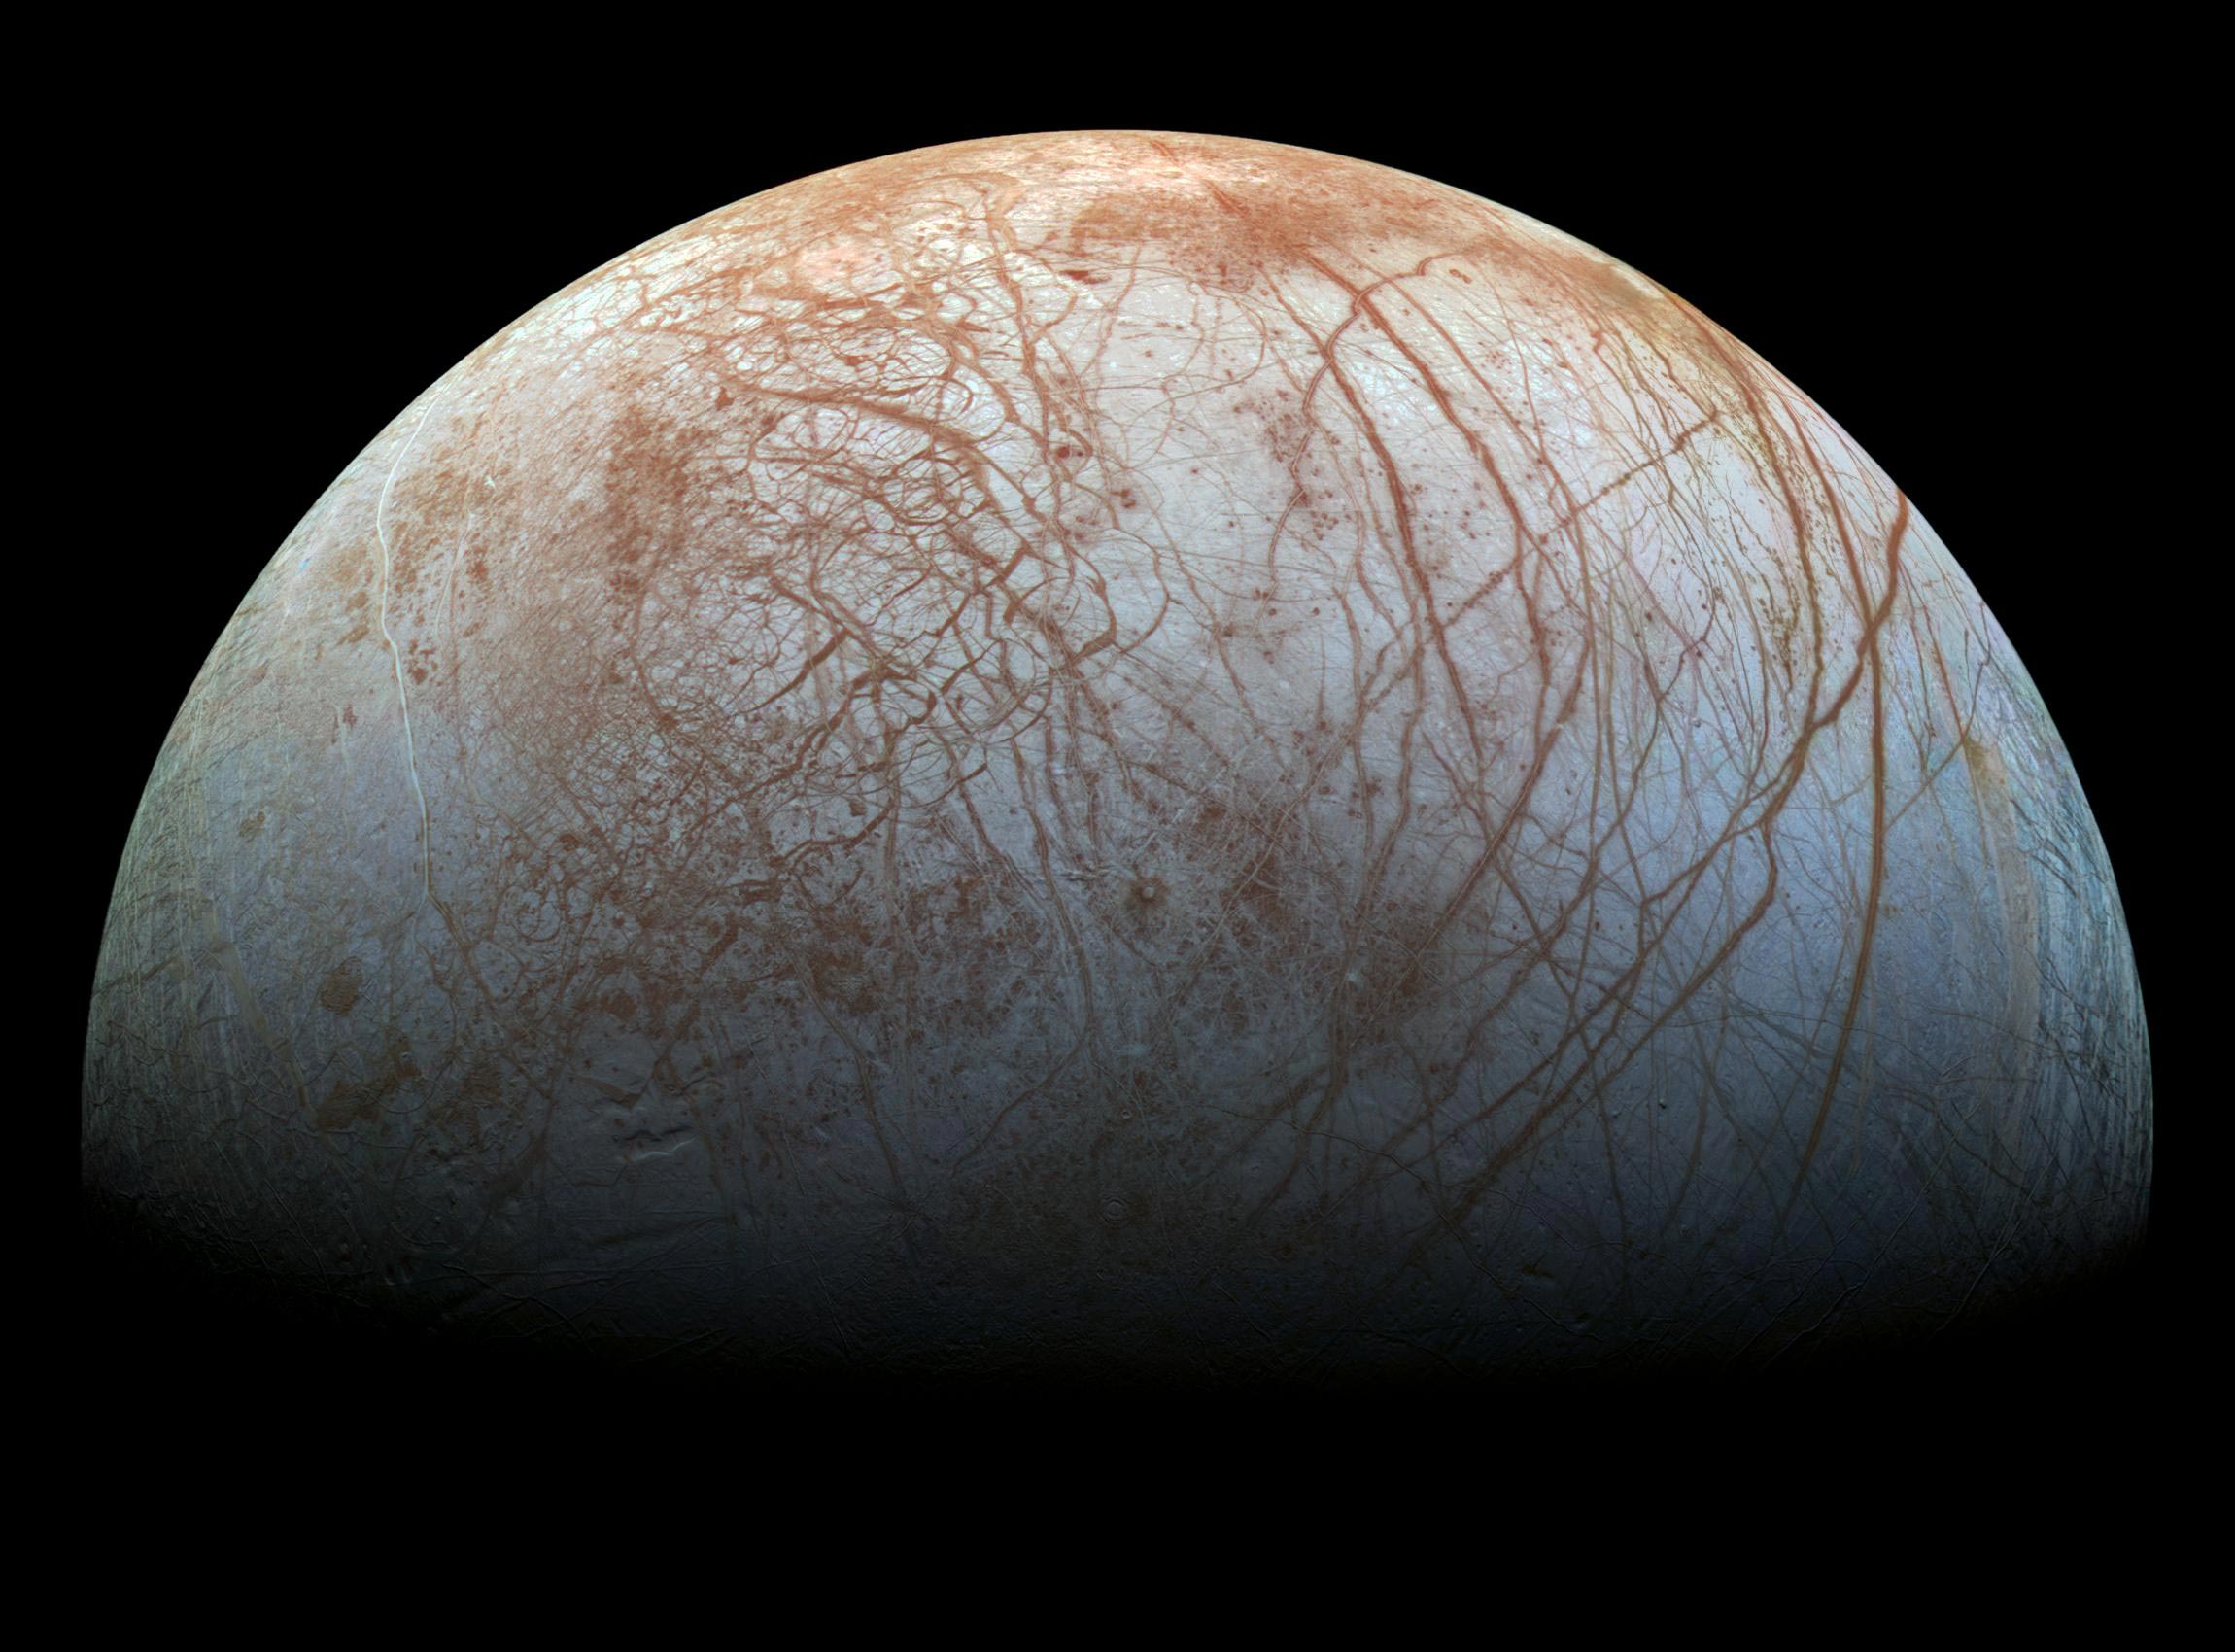 Hubble discovers mysterious regeneration of water vapor on Jupiter's moon Europa